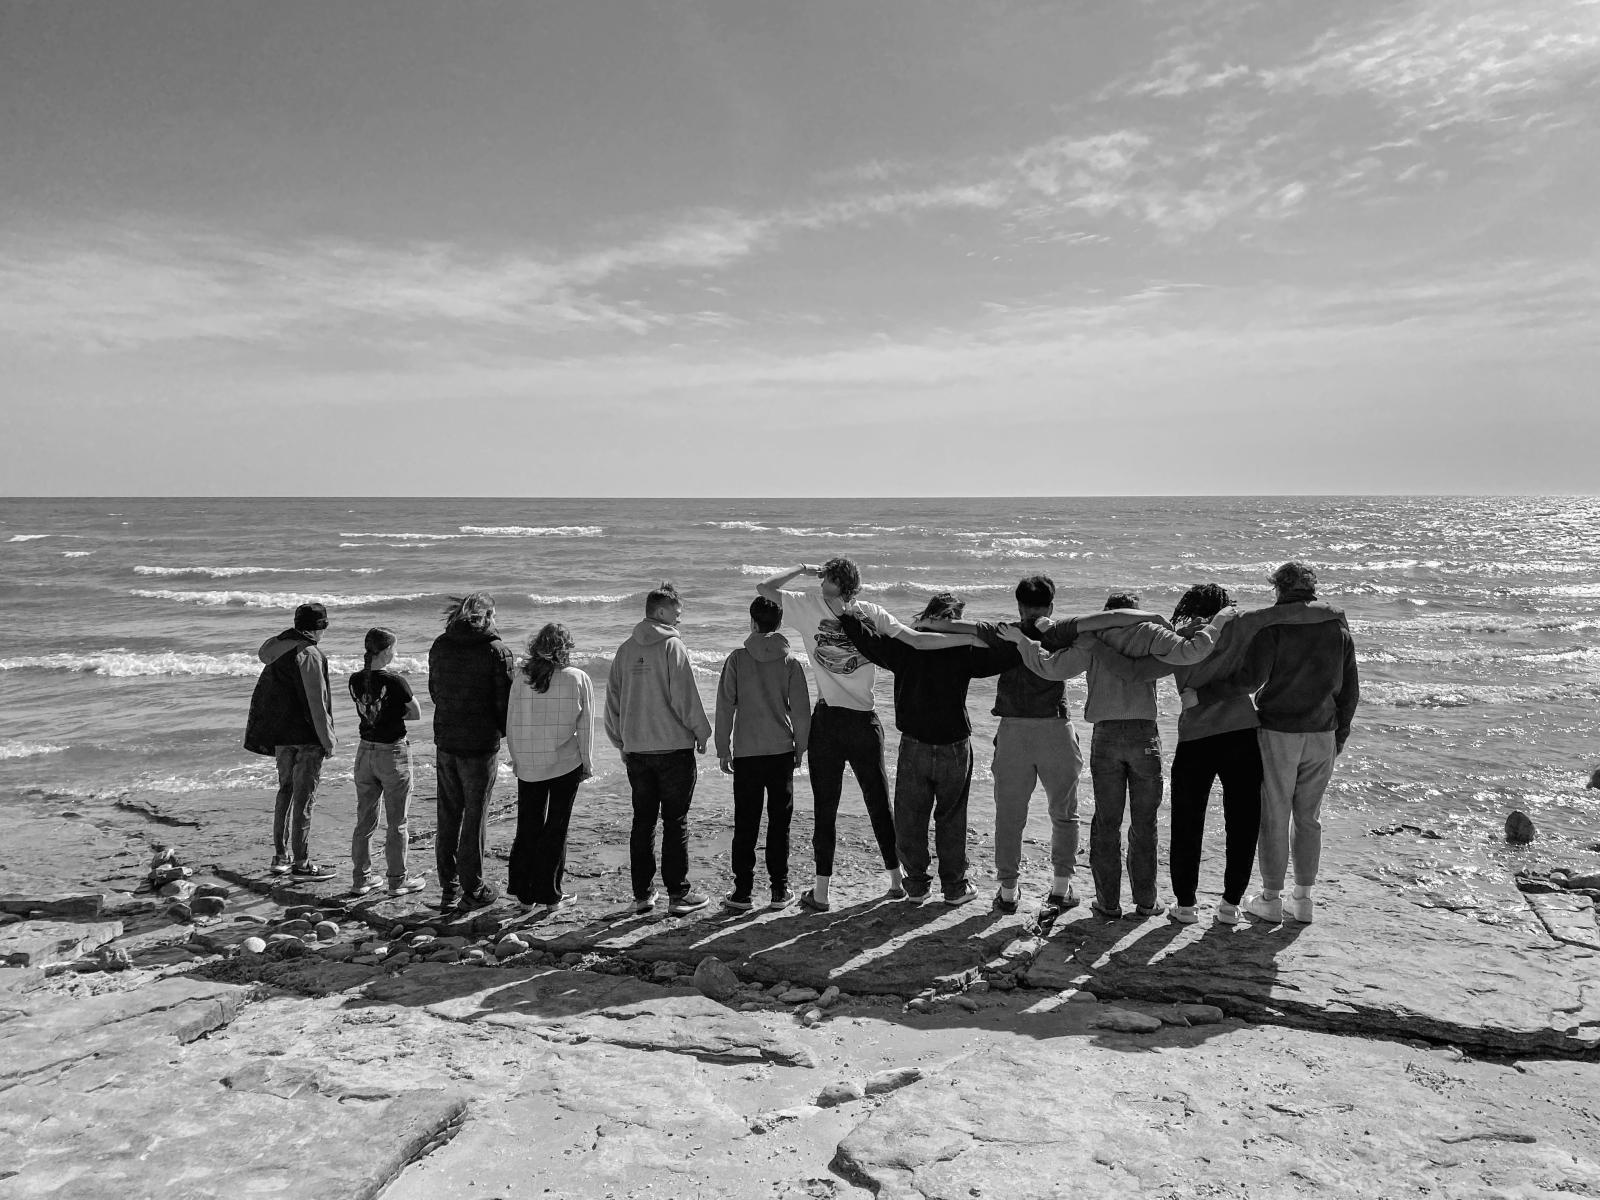 A group of students stand with their backs facing the camera on a rocky shoreline